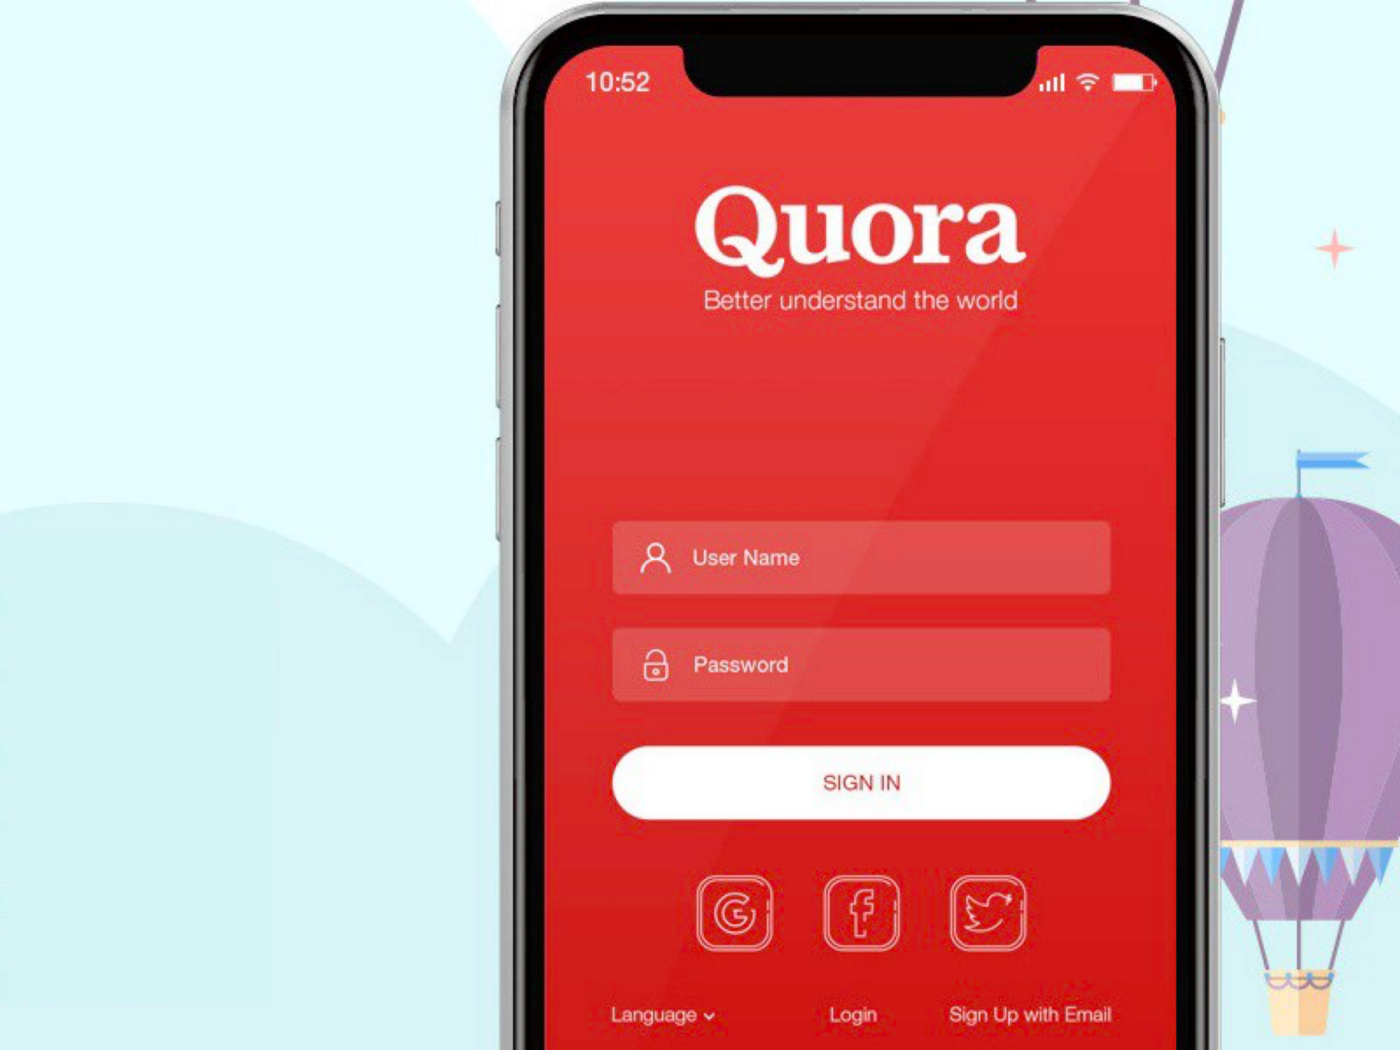 A Simple and Verified Way to Get More Views on Quora